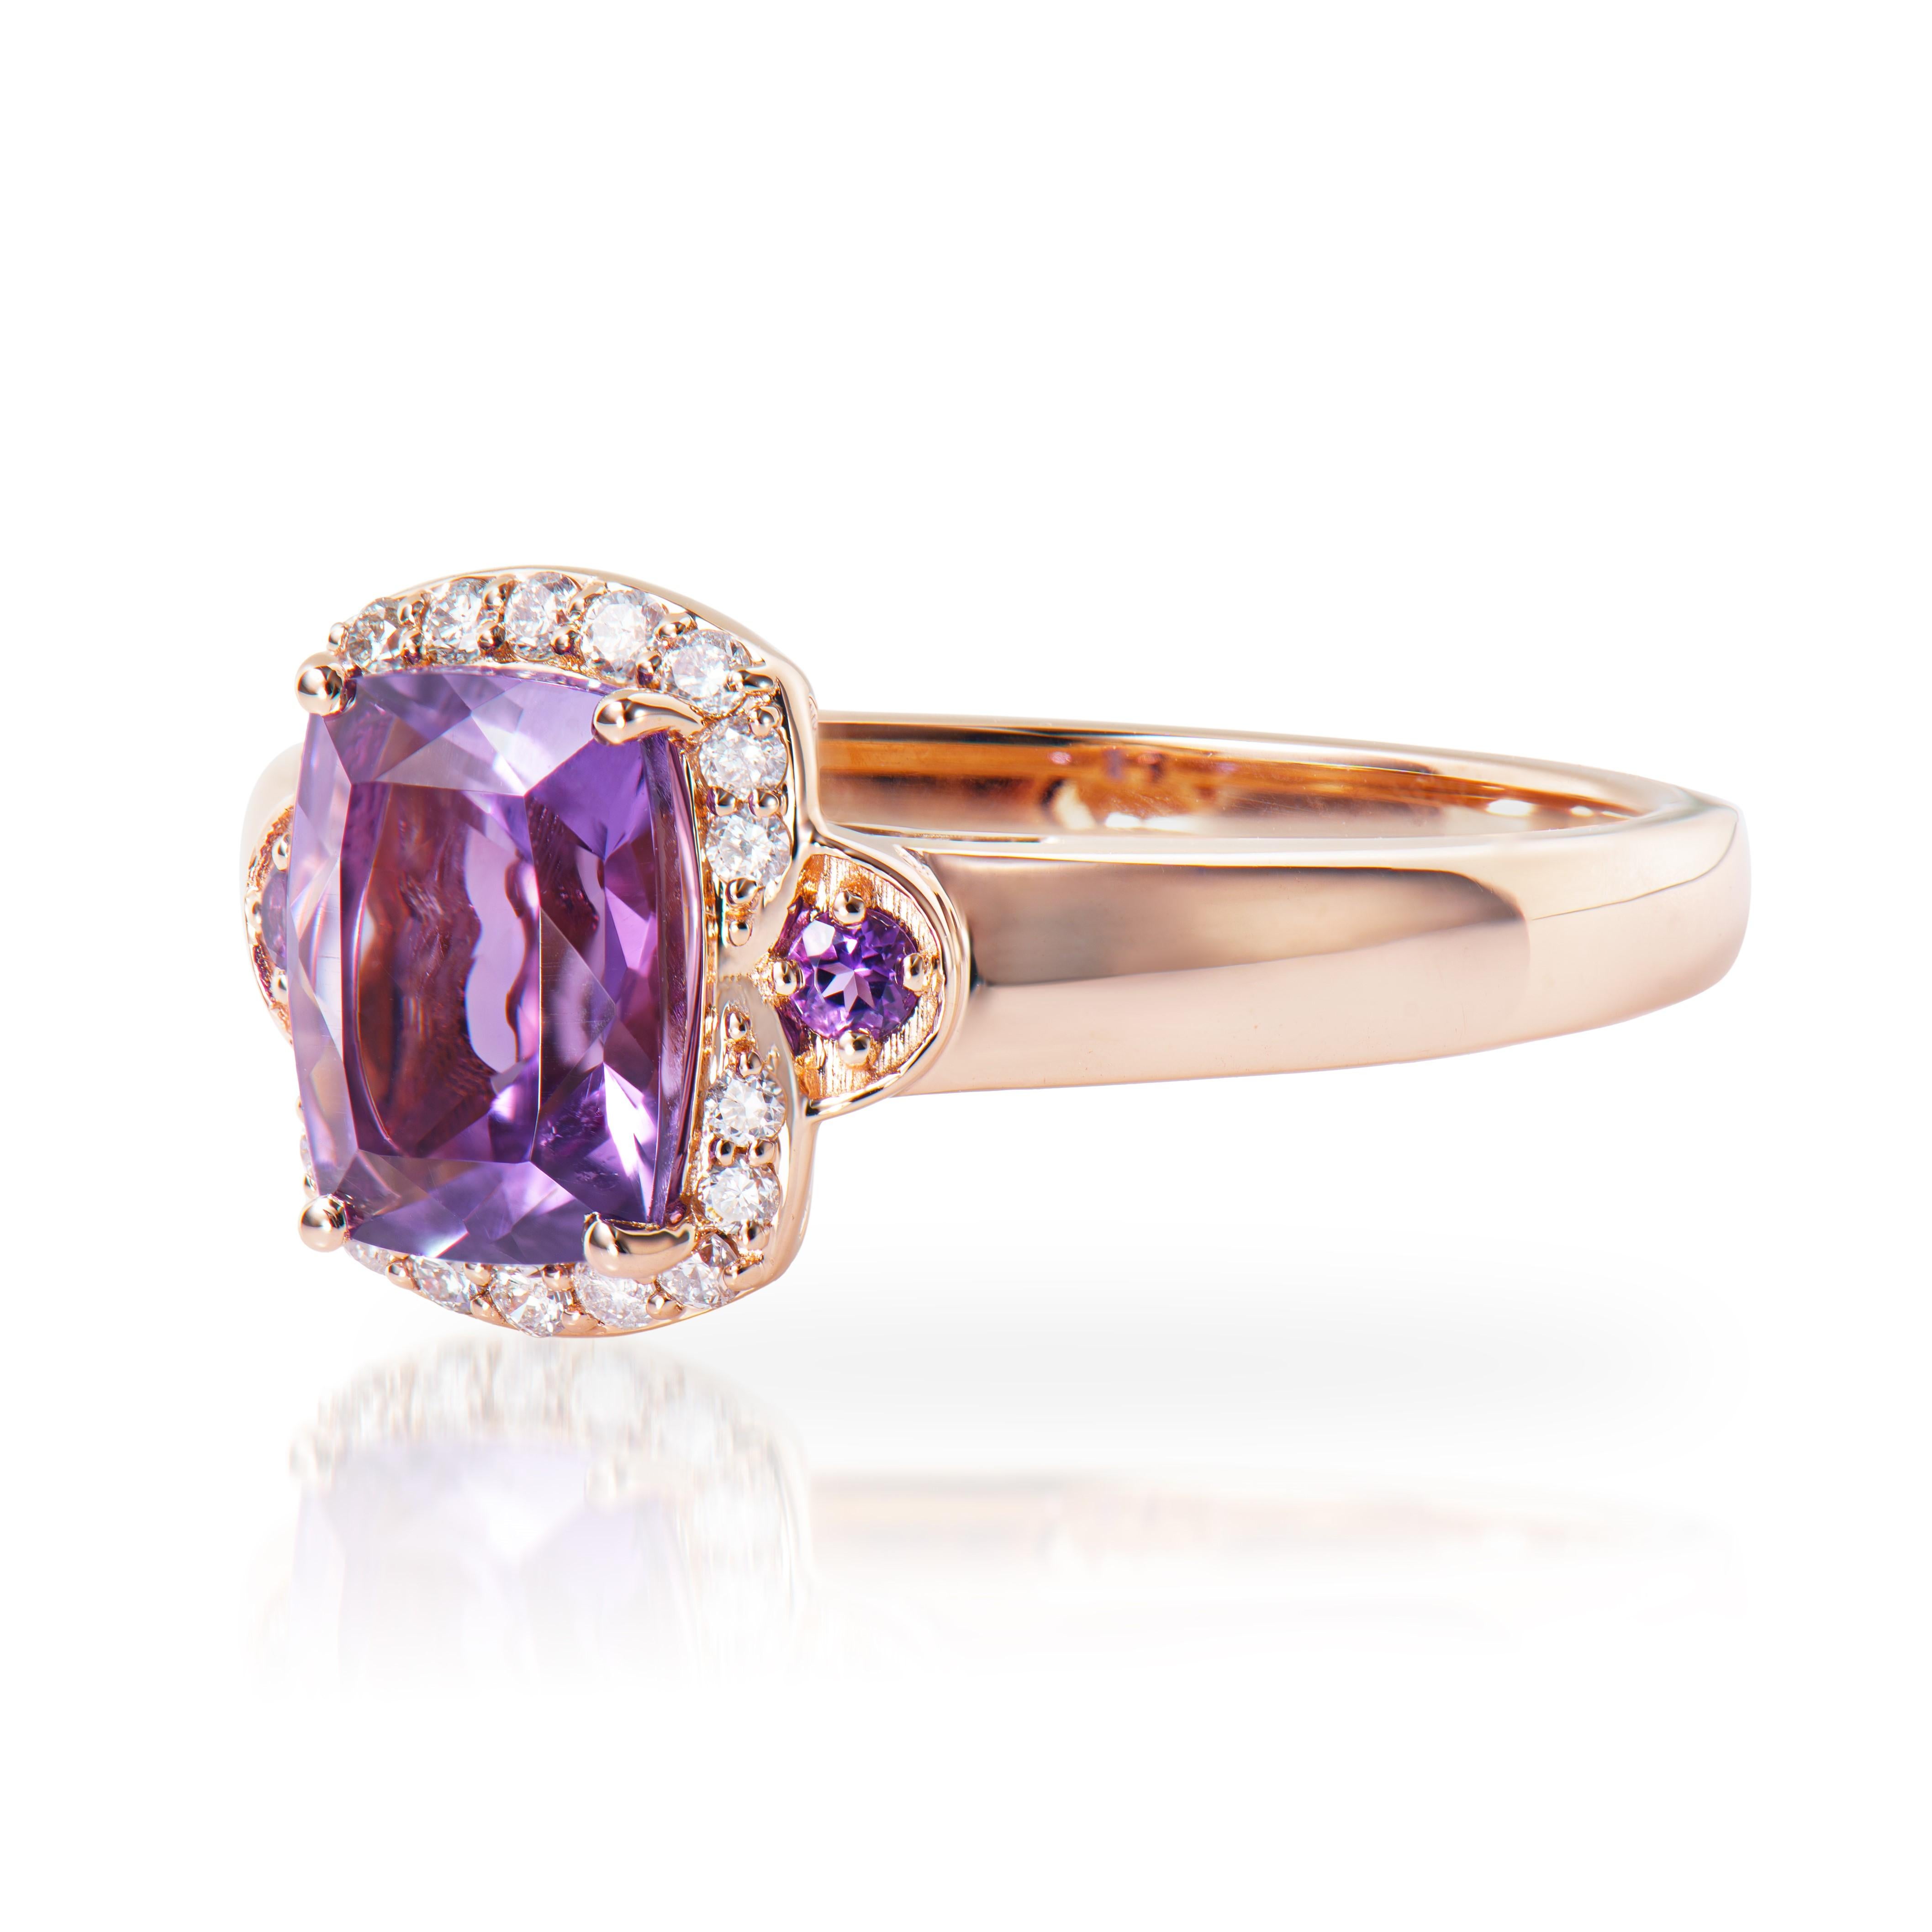 Cushion Cut 1.36 Carat Amethyst Fancy Ring in 14Karat Rose Gold with White Diamond.   For Sale